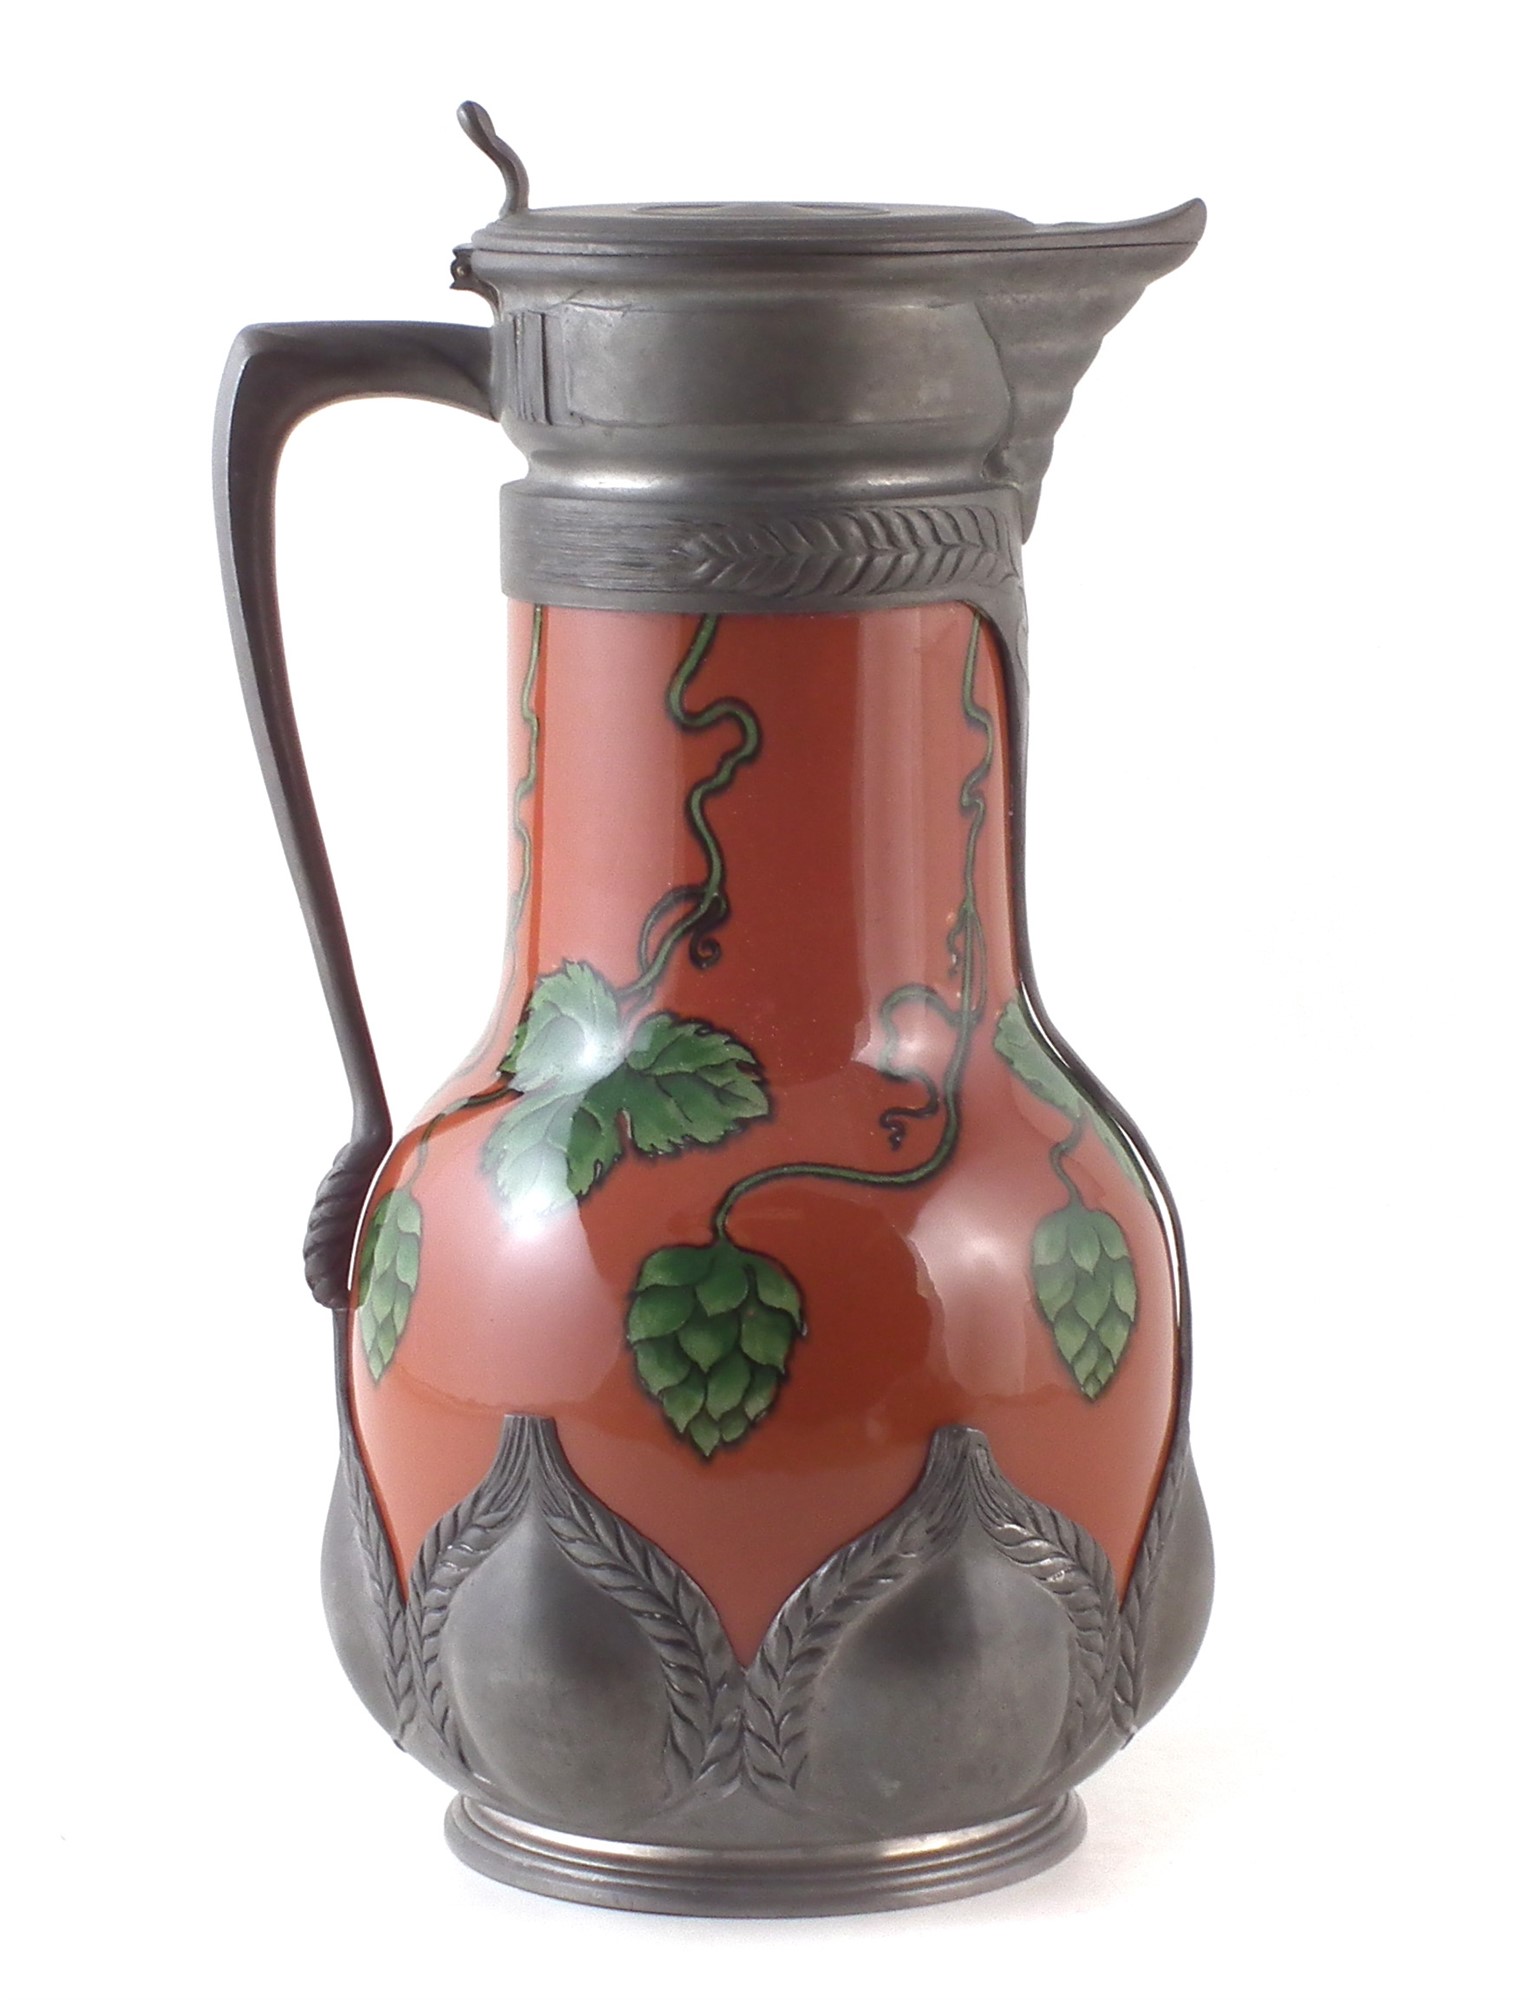 Villeroy and Boch orivit pewter beer jug circa 1900 , decorated with hops, the pewter mount